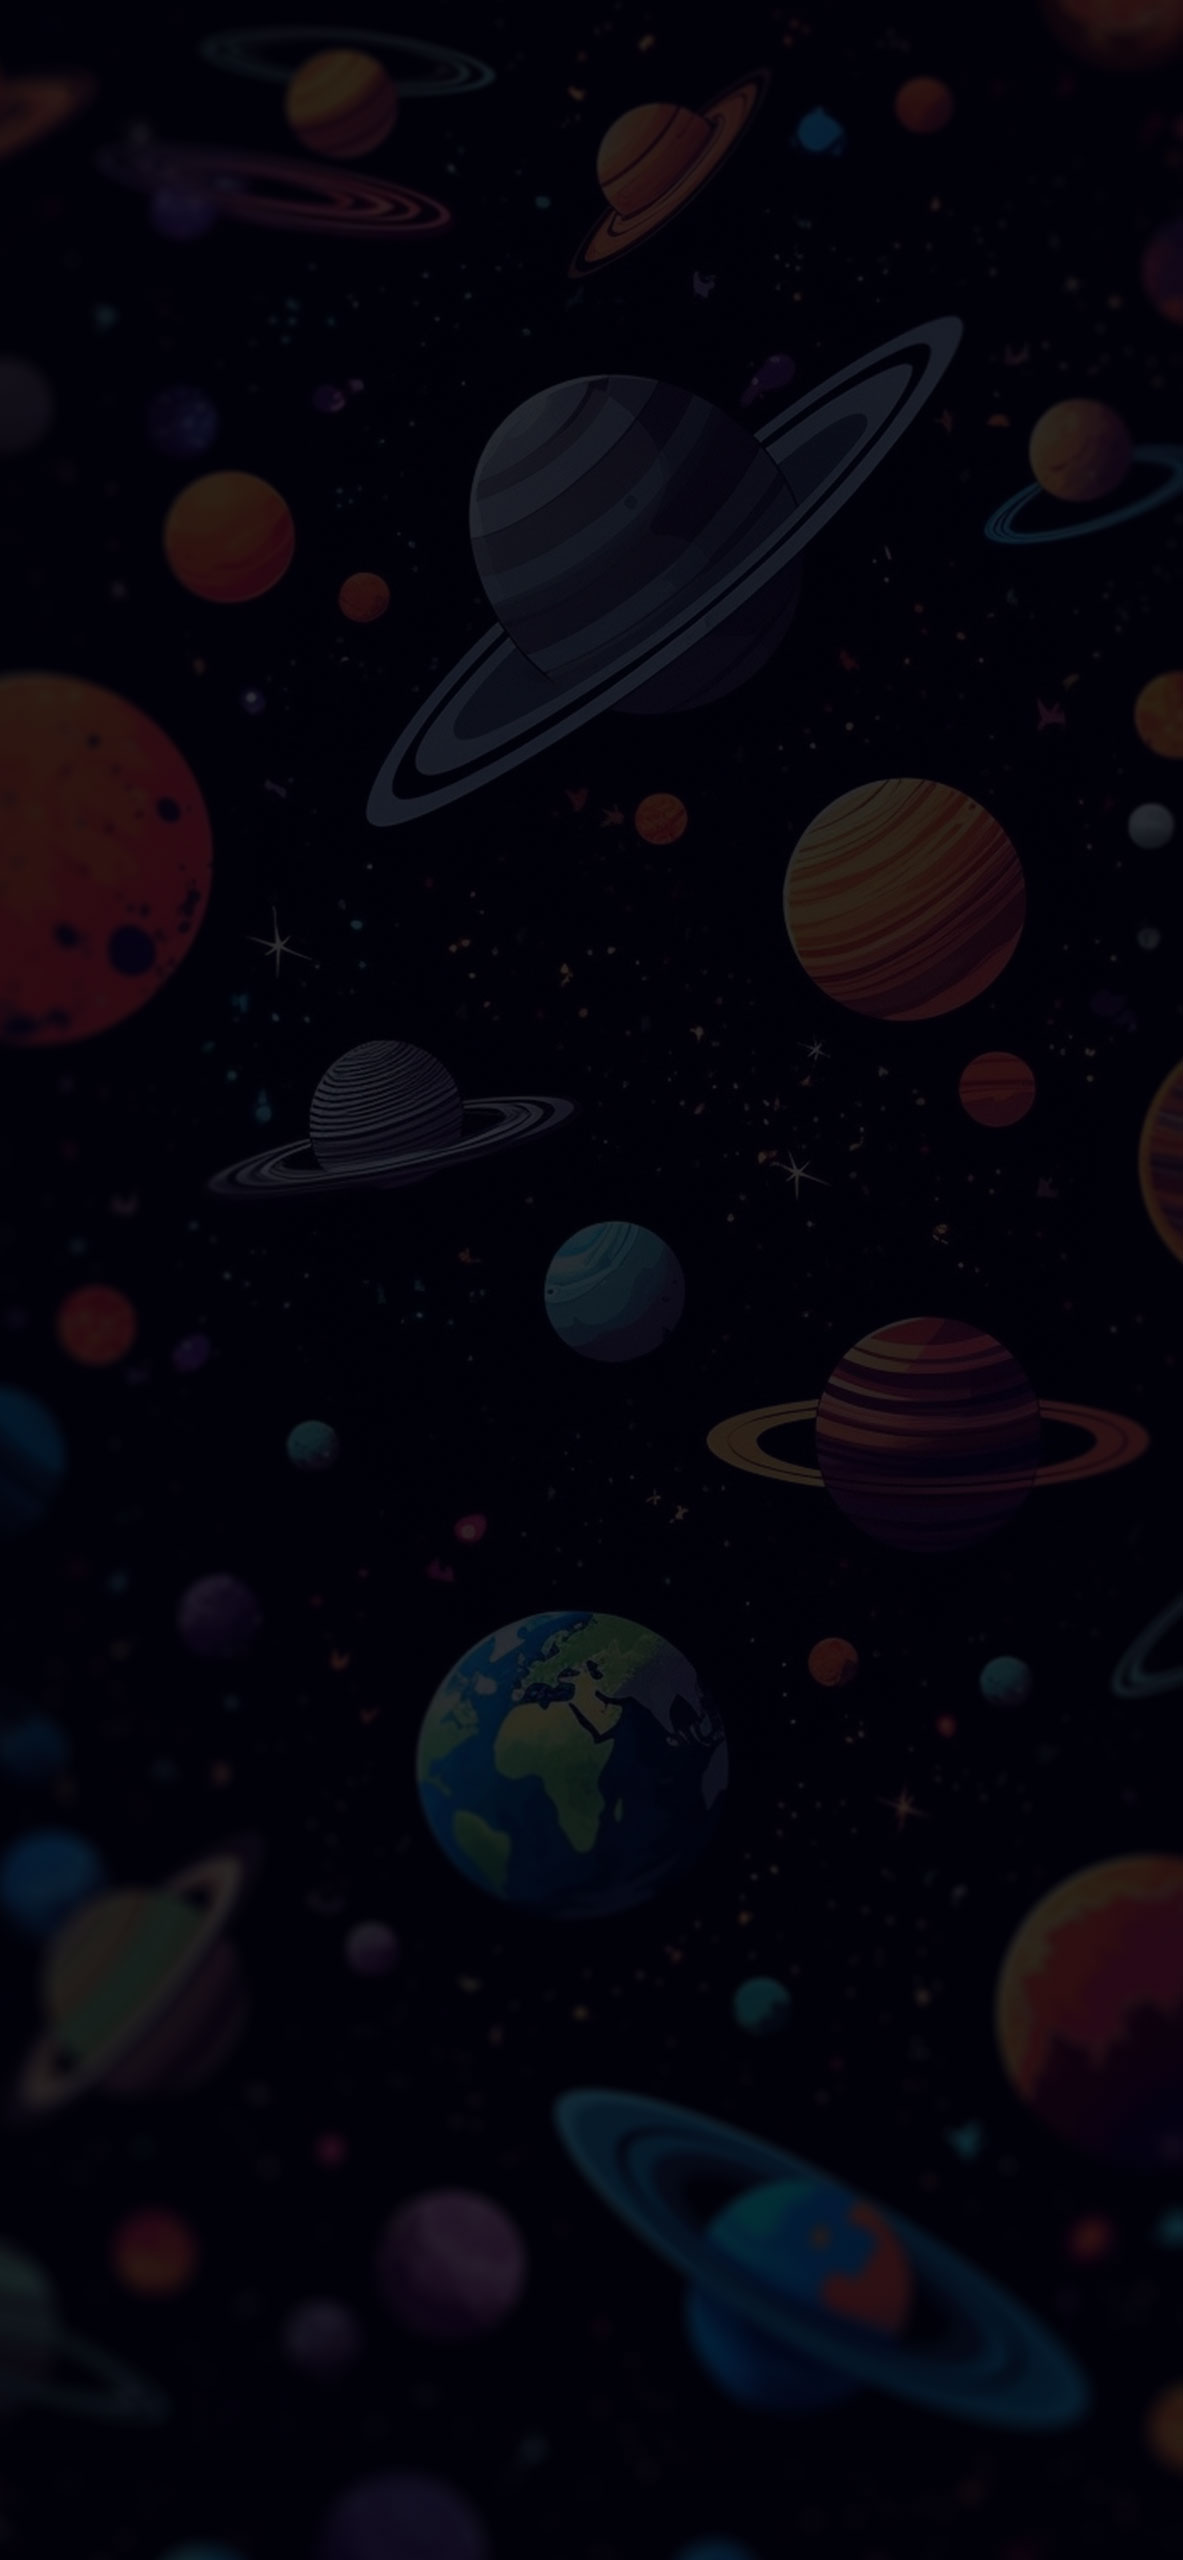 Galaxy Space Wallpapers  Backgrounds  Custom Home Screen Maker with HD  Pictures of Astronomy  Planet on the App Store